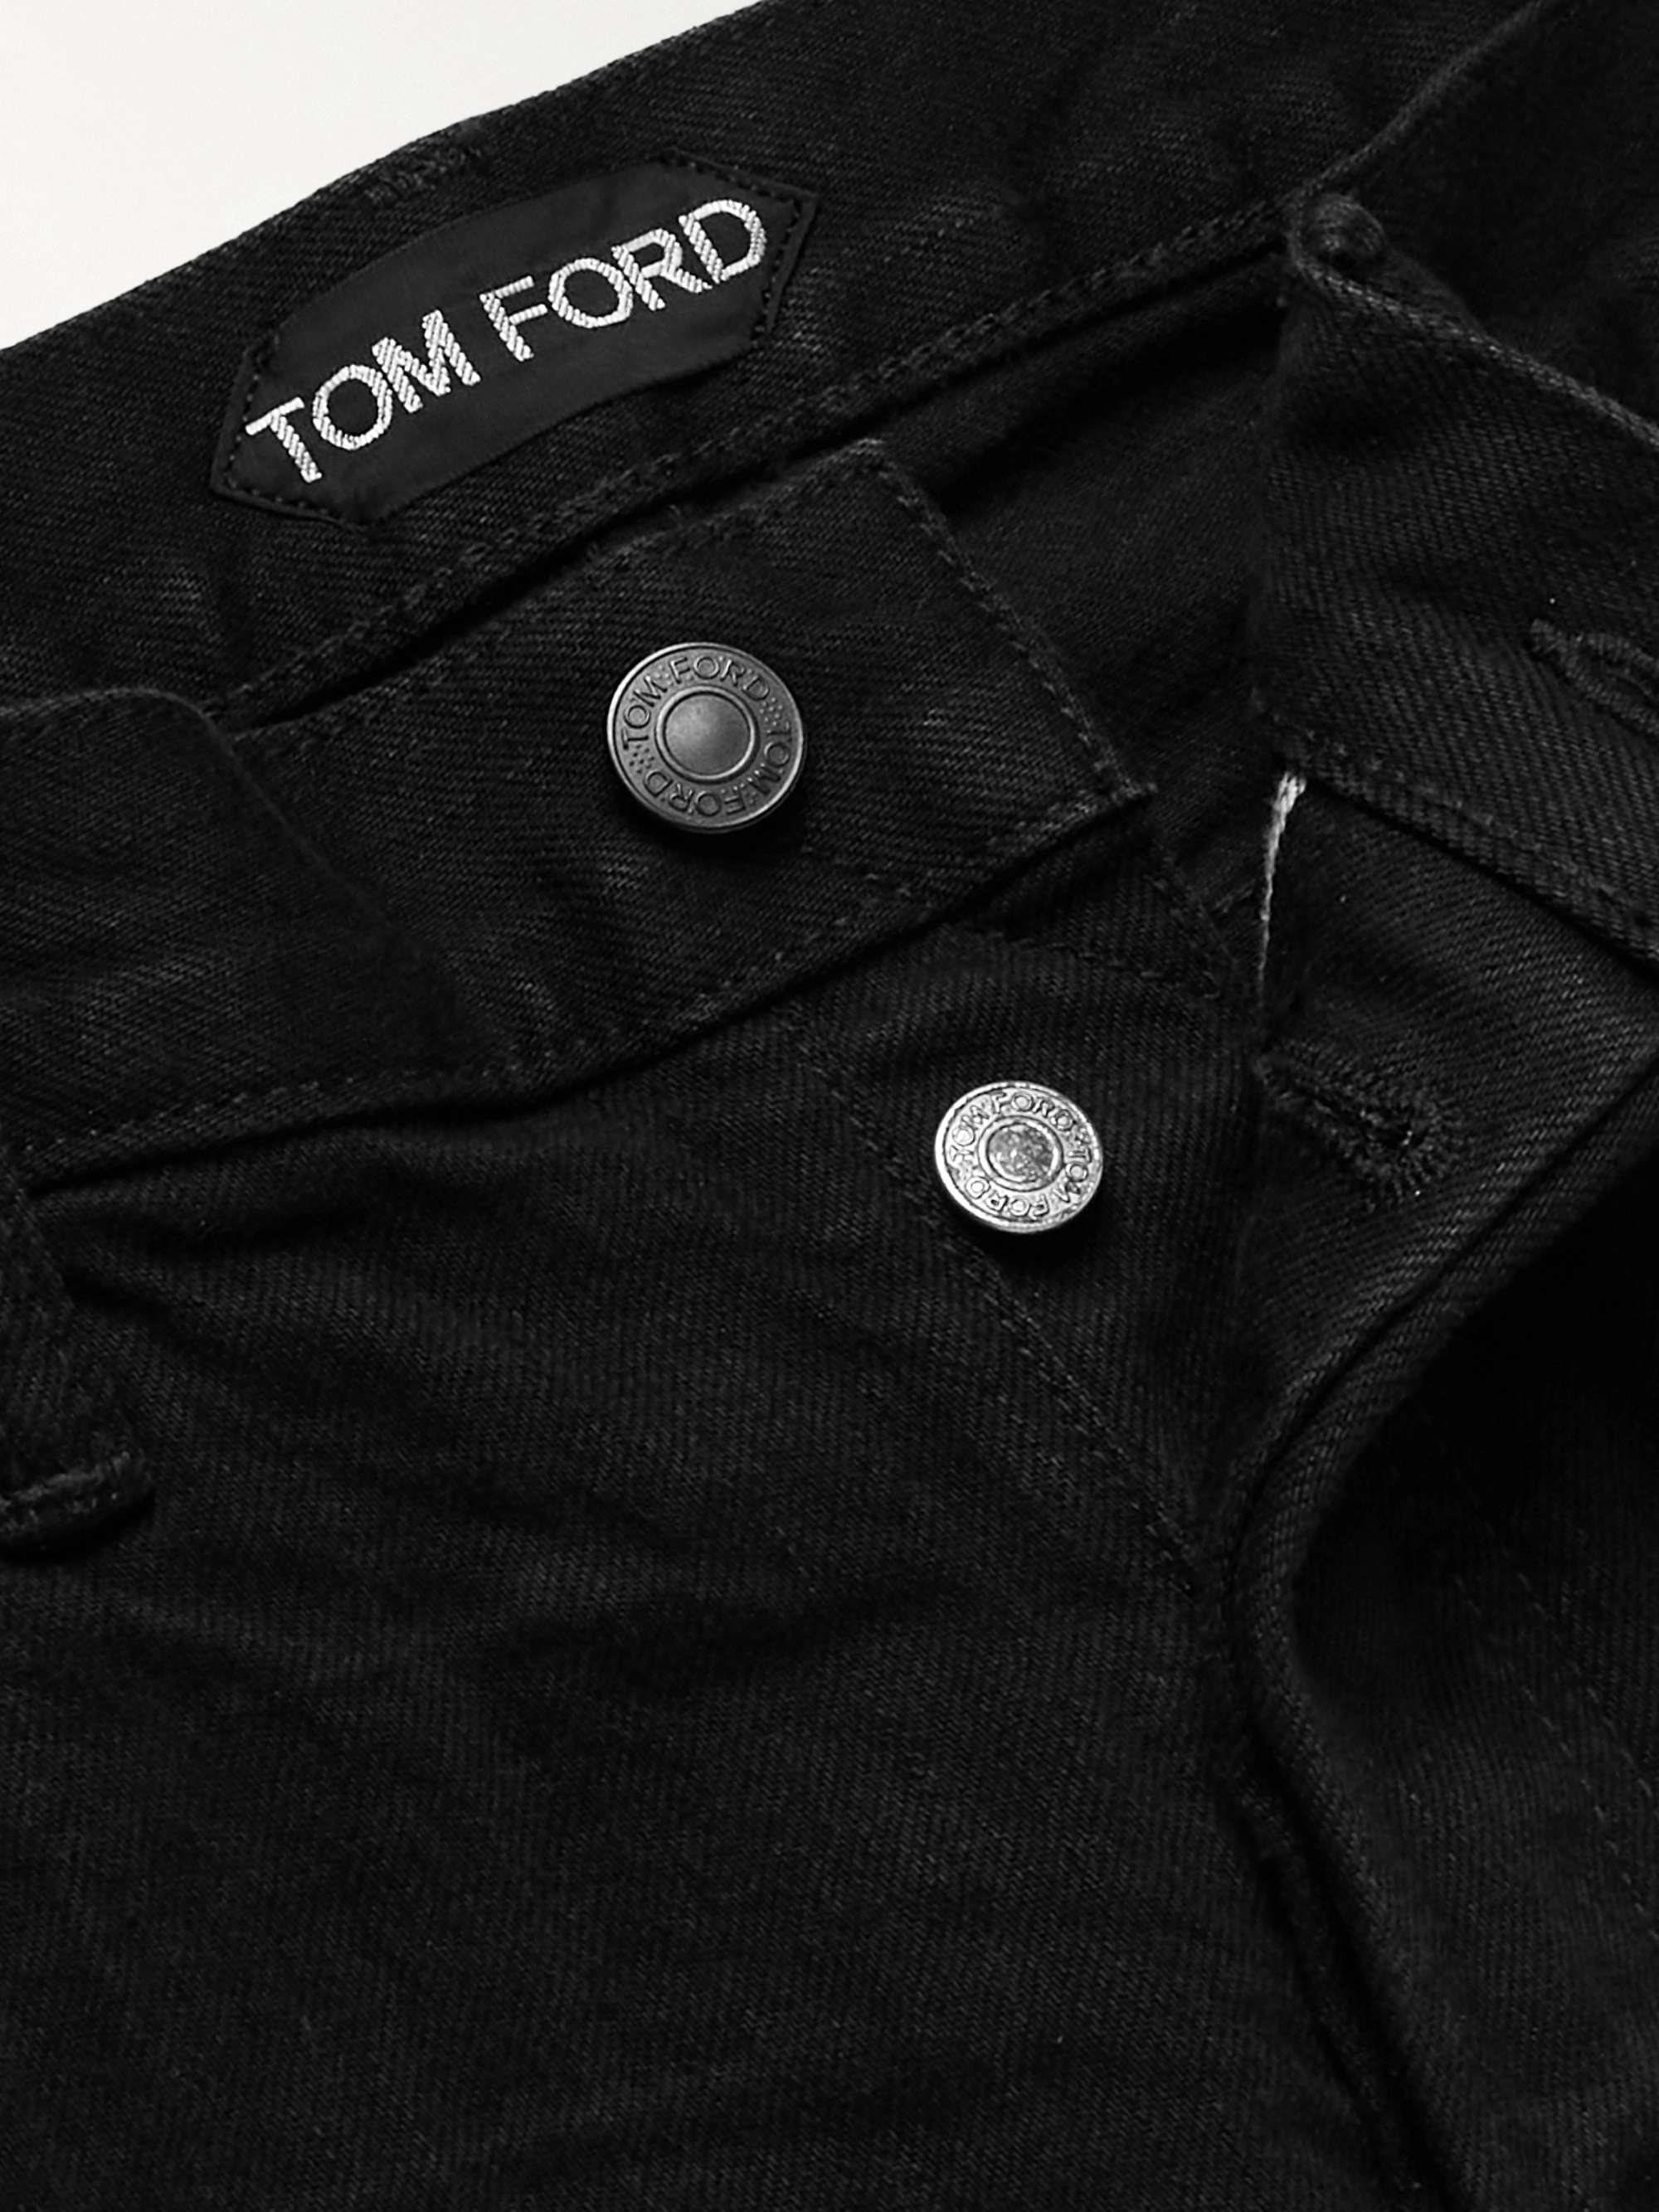 TOM FORD Slim-Fit Washed Selvedge Jeans